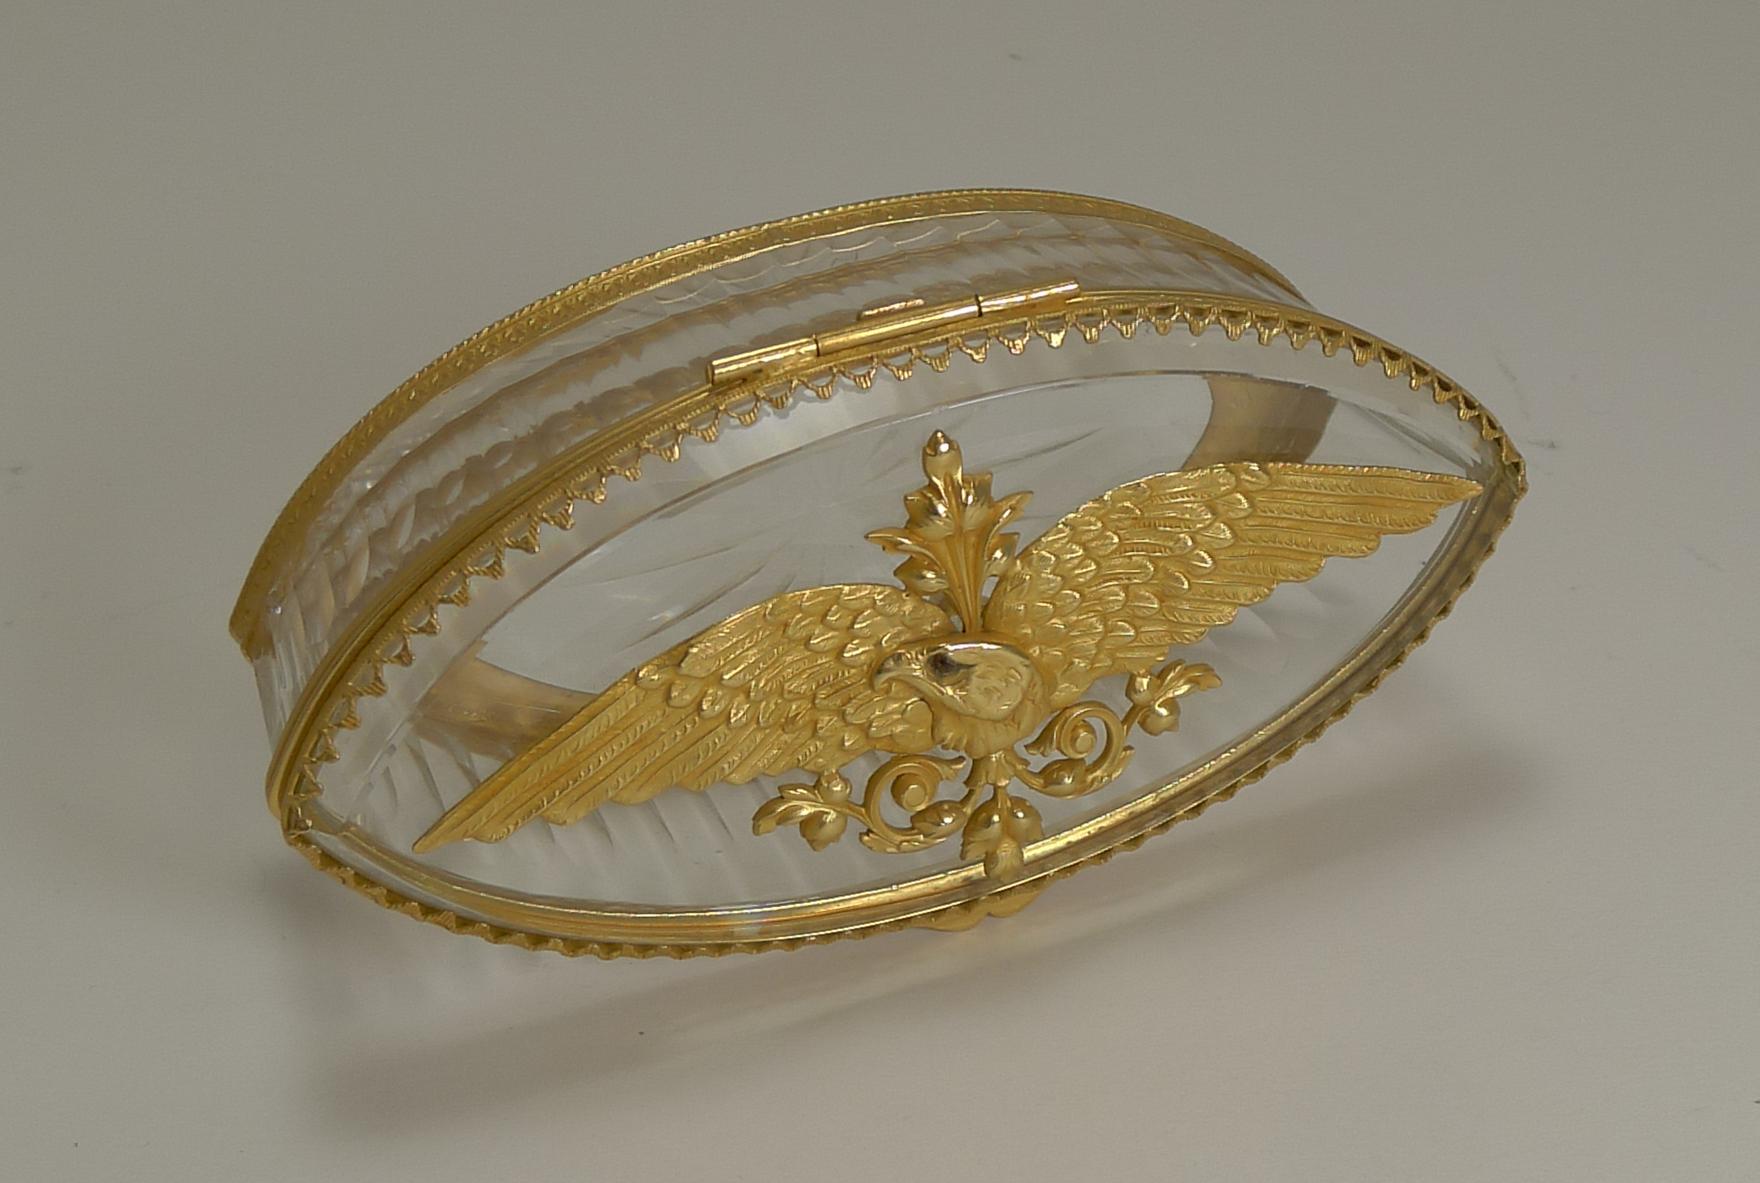 A most unusual and highly collectable cut crystal box of oval form with elegant channel cuts all around the sides.

The fittings are all made from gilded bronze and the lid adorned with a striking eagle with wings spread and the original red stone